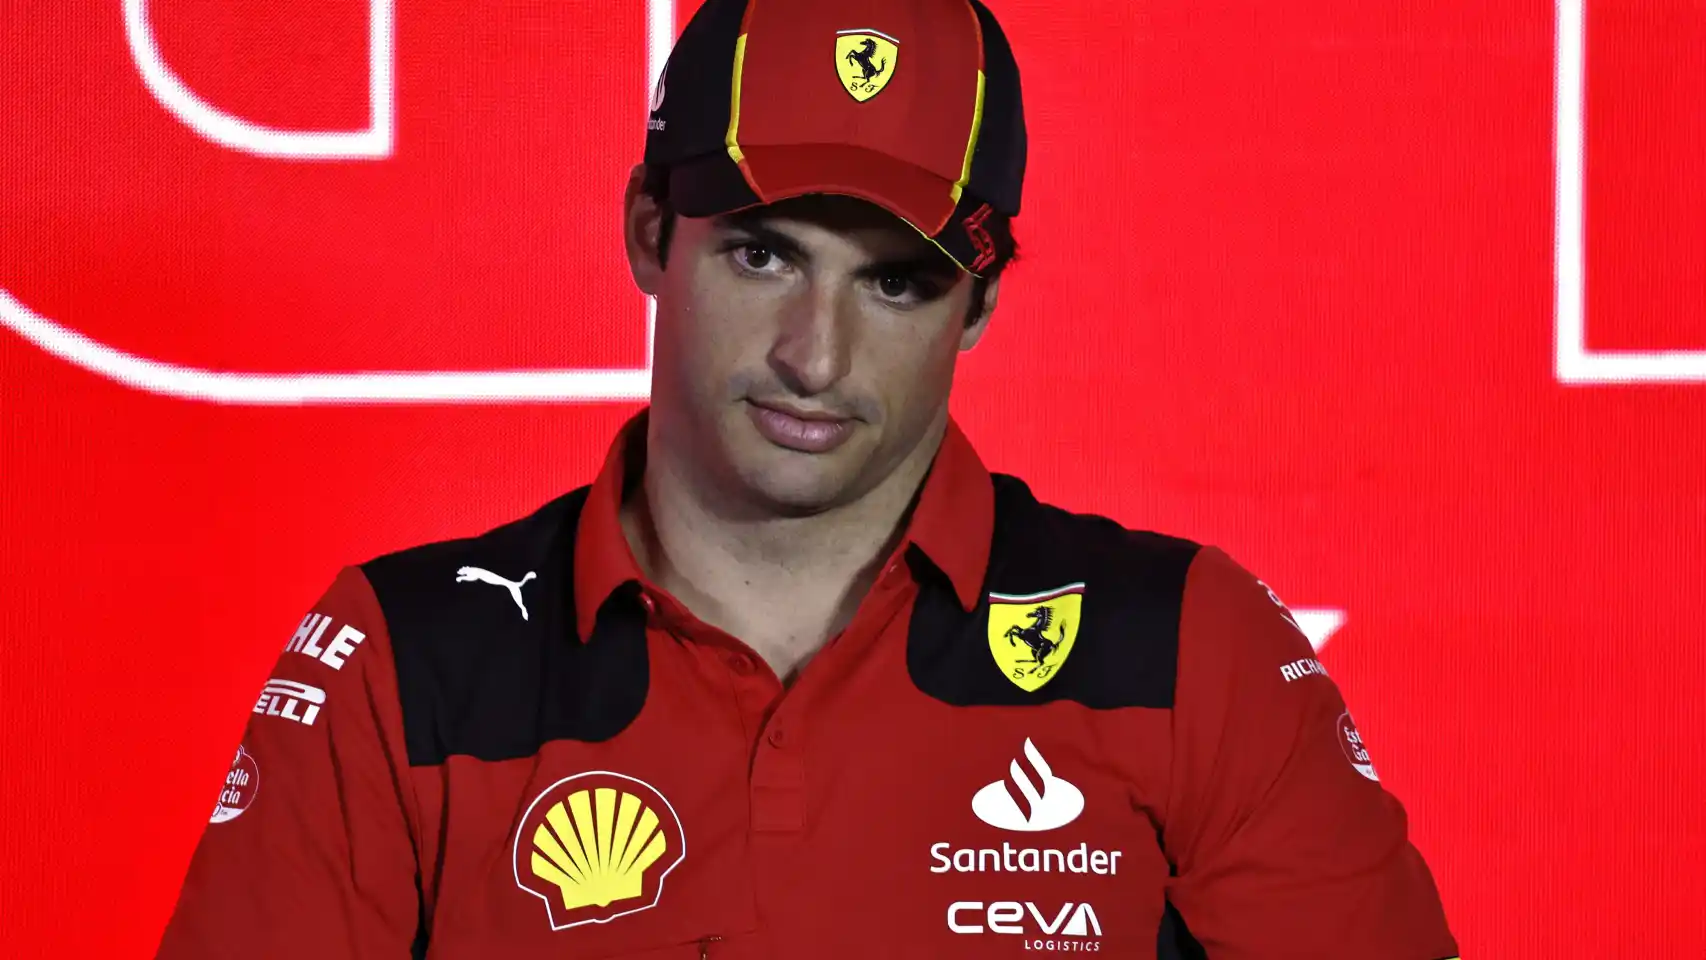 Carlos Sainz coldly serves his revenge on Ferrari: he will have a winning car in his new team
	
